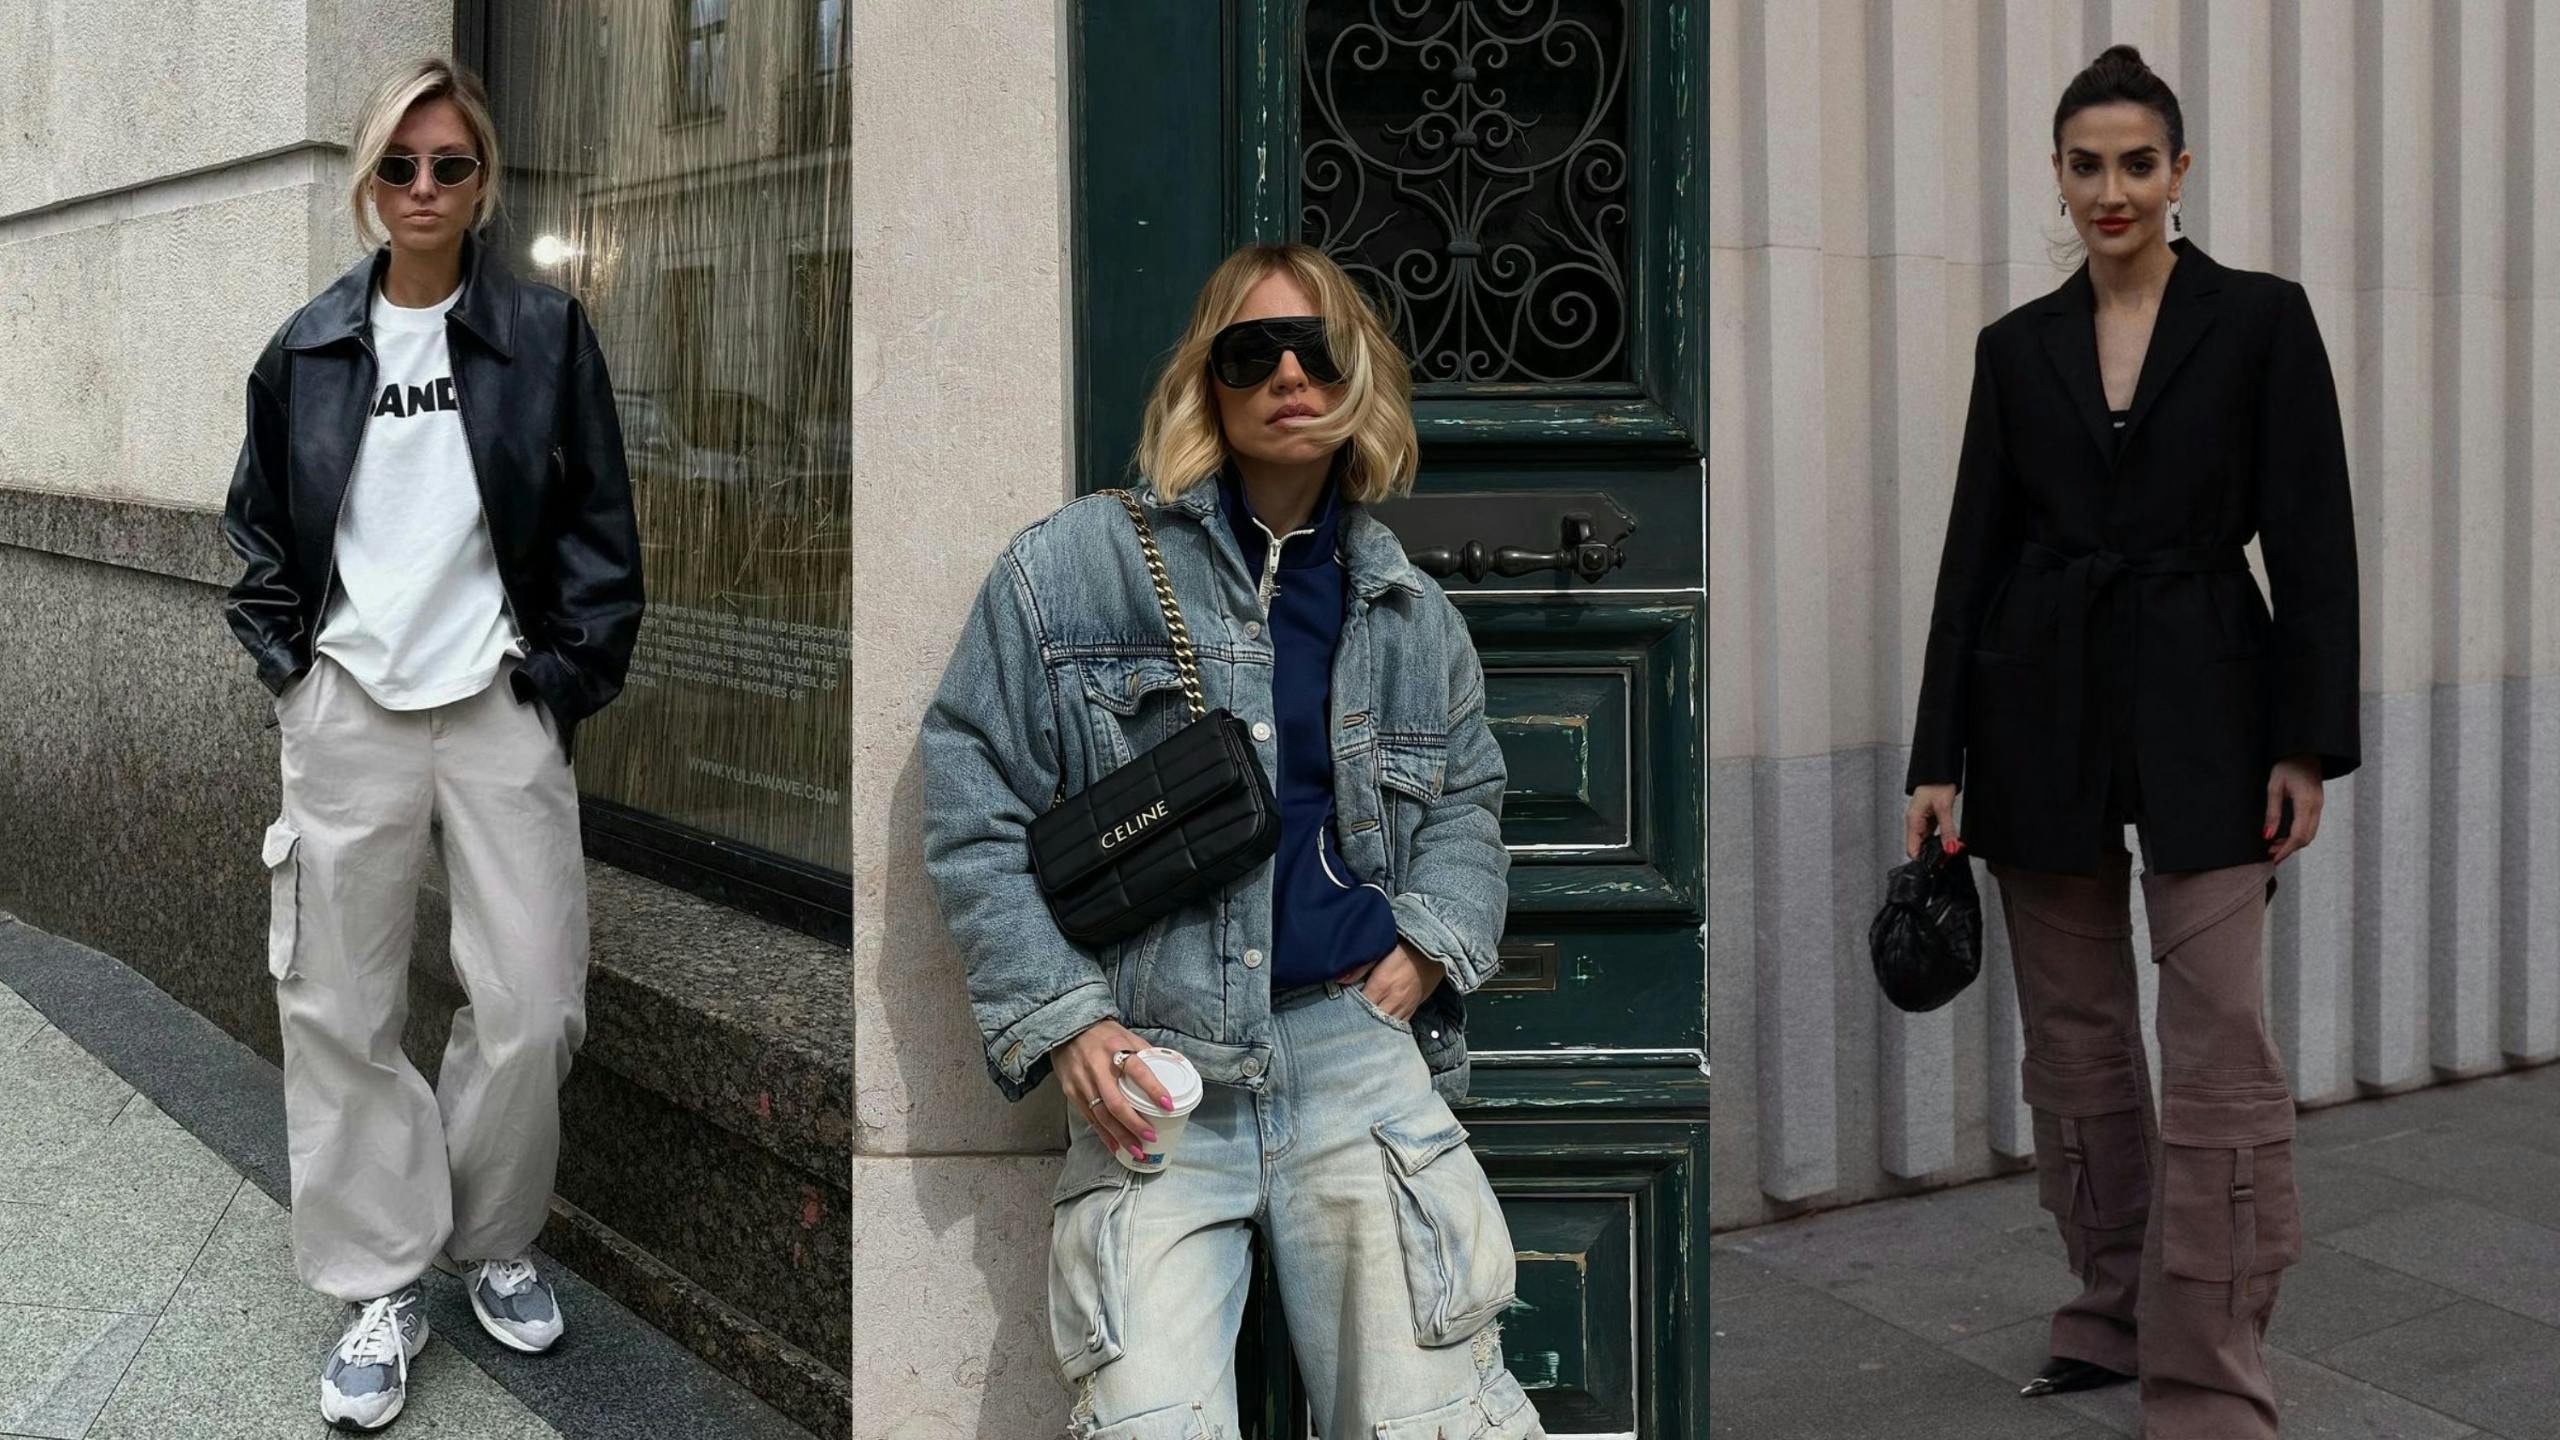 What do Instagram fashionistas pair cargo pants with?